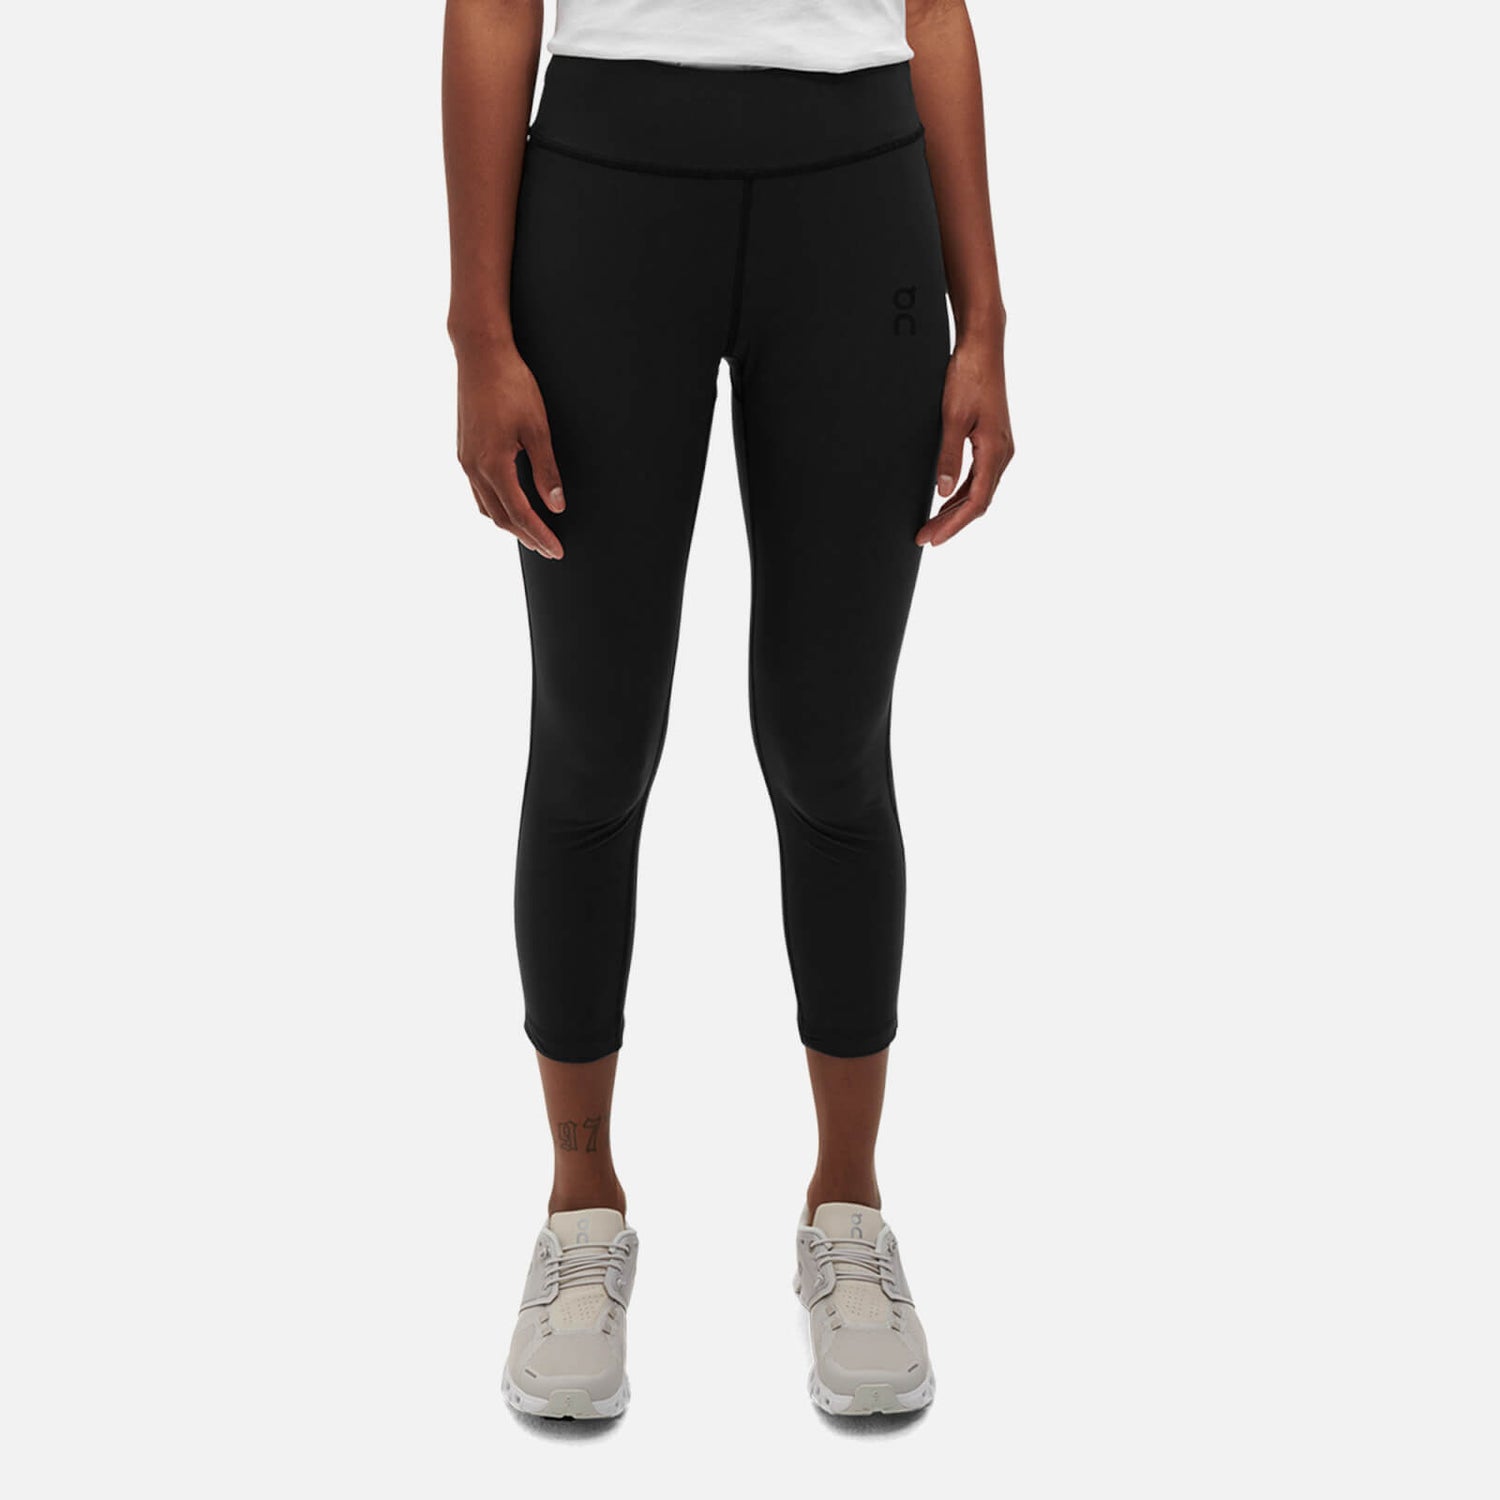 ON Women's Active Tights - Black - XS